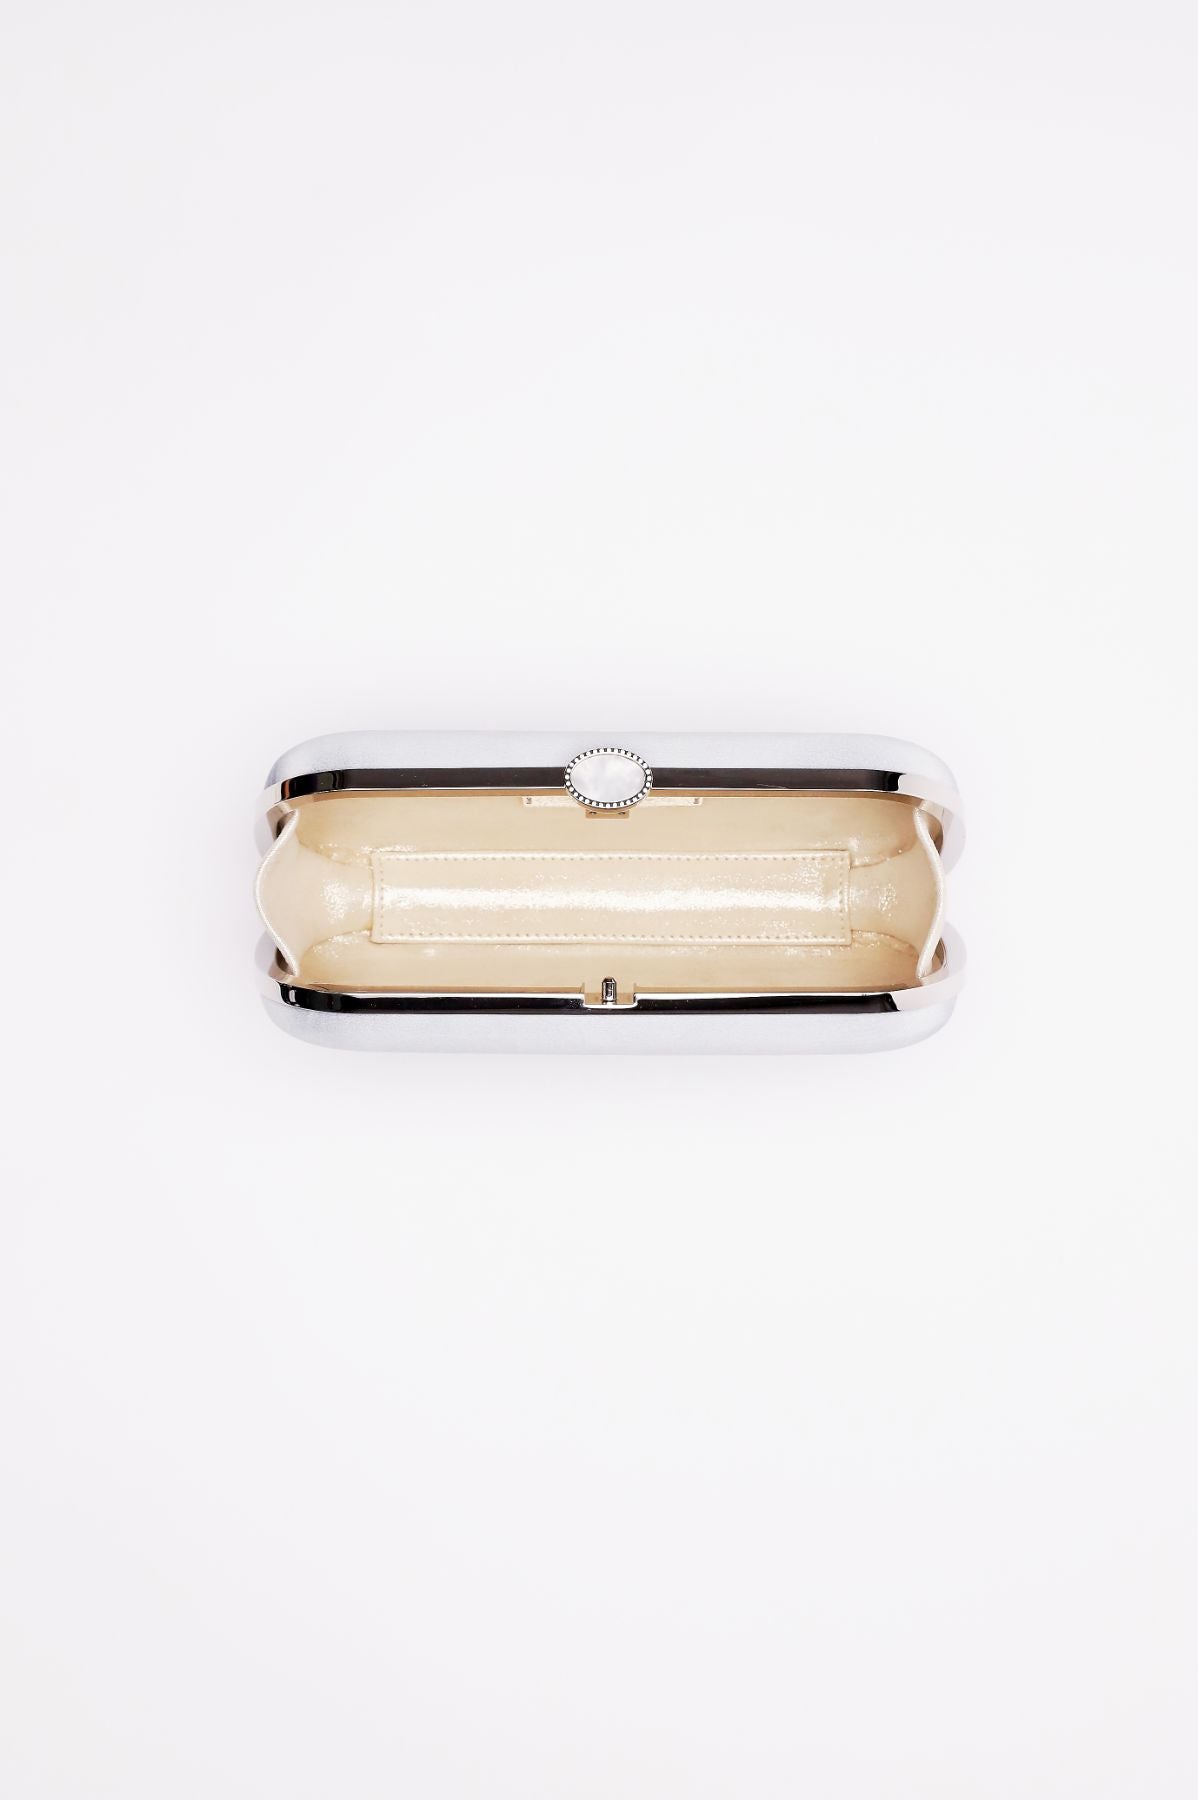 An unused stick of butter in a Bella Clutch Steel Blue Satin Grande butter dish from The Bella Rosa Collection, photographed from above against a white background.